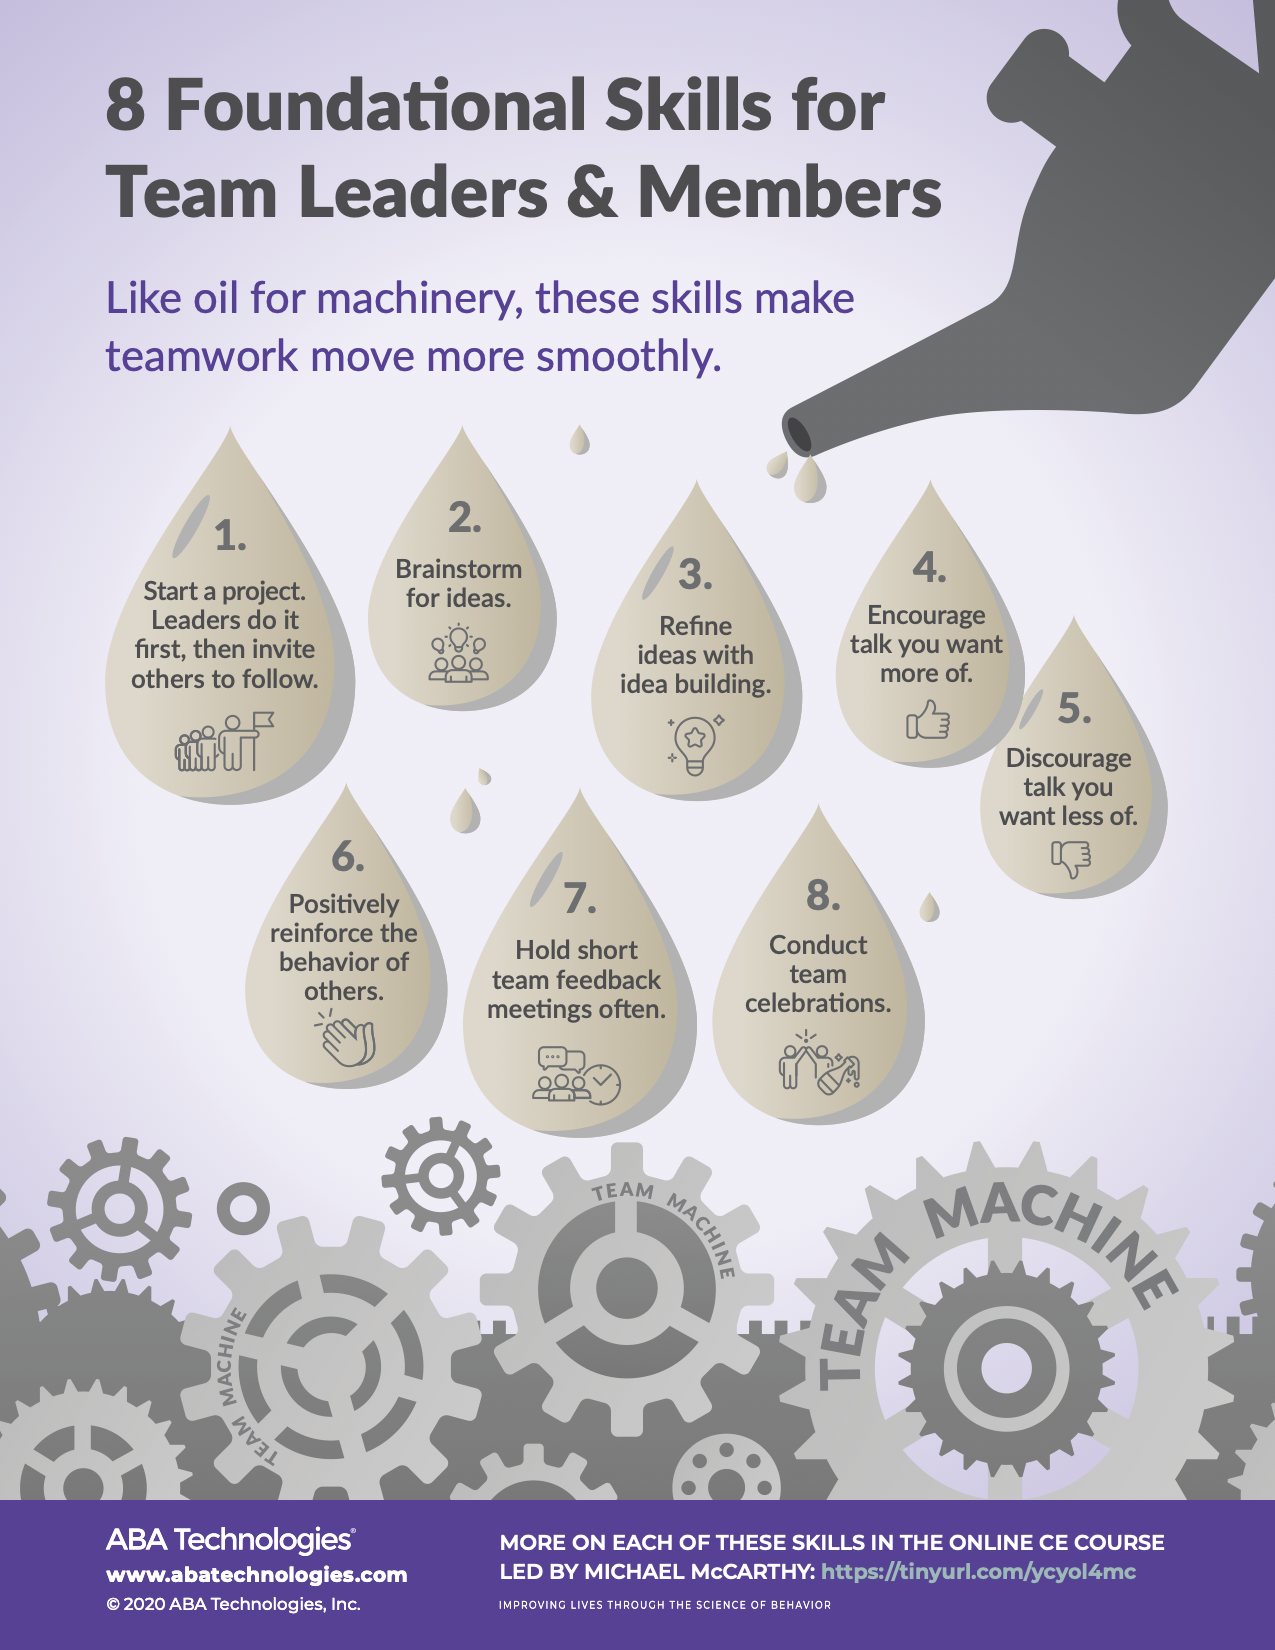 8 Foundational Skills for Team Leaders Infographic